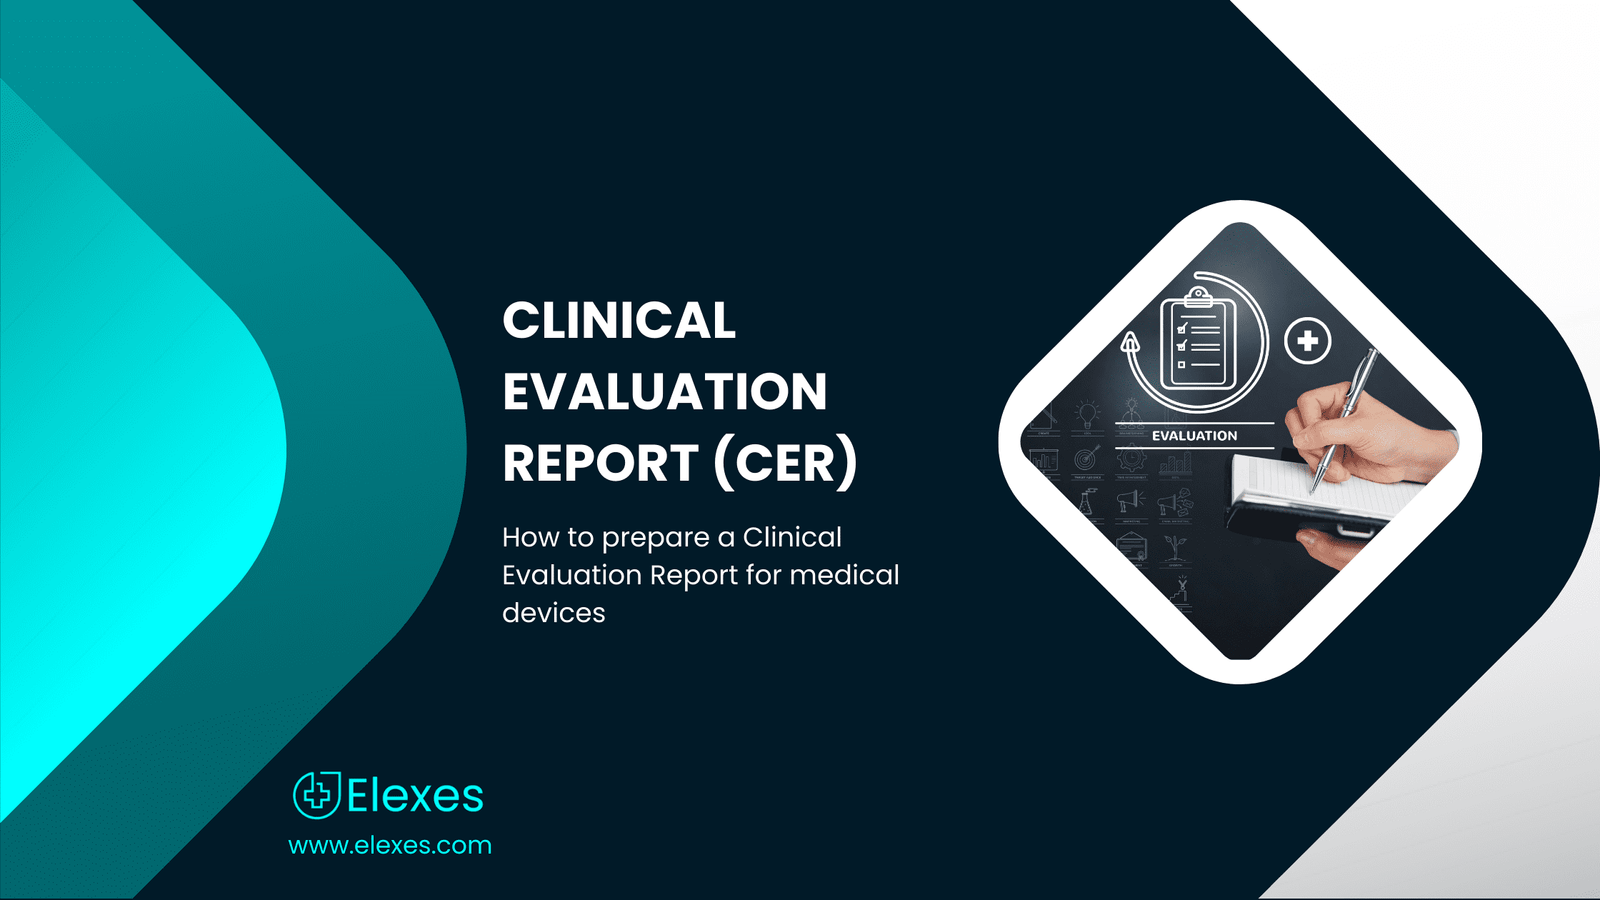 Clinical Evaluation Report (CER)